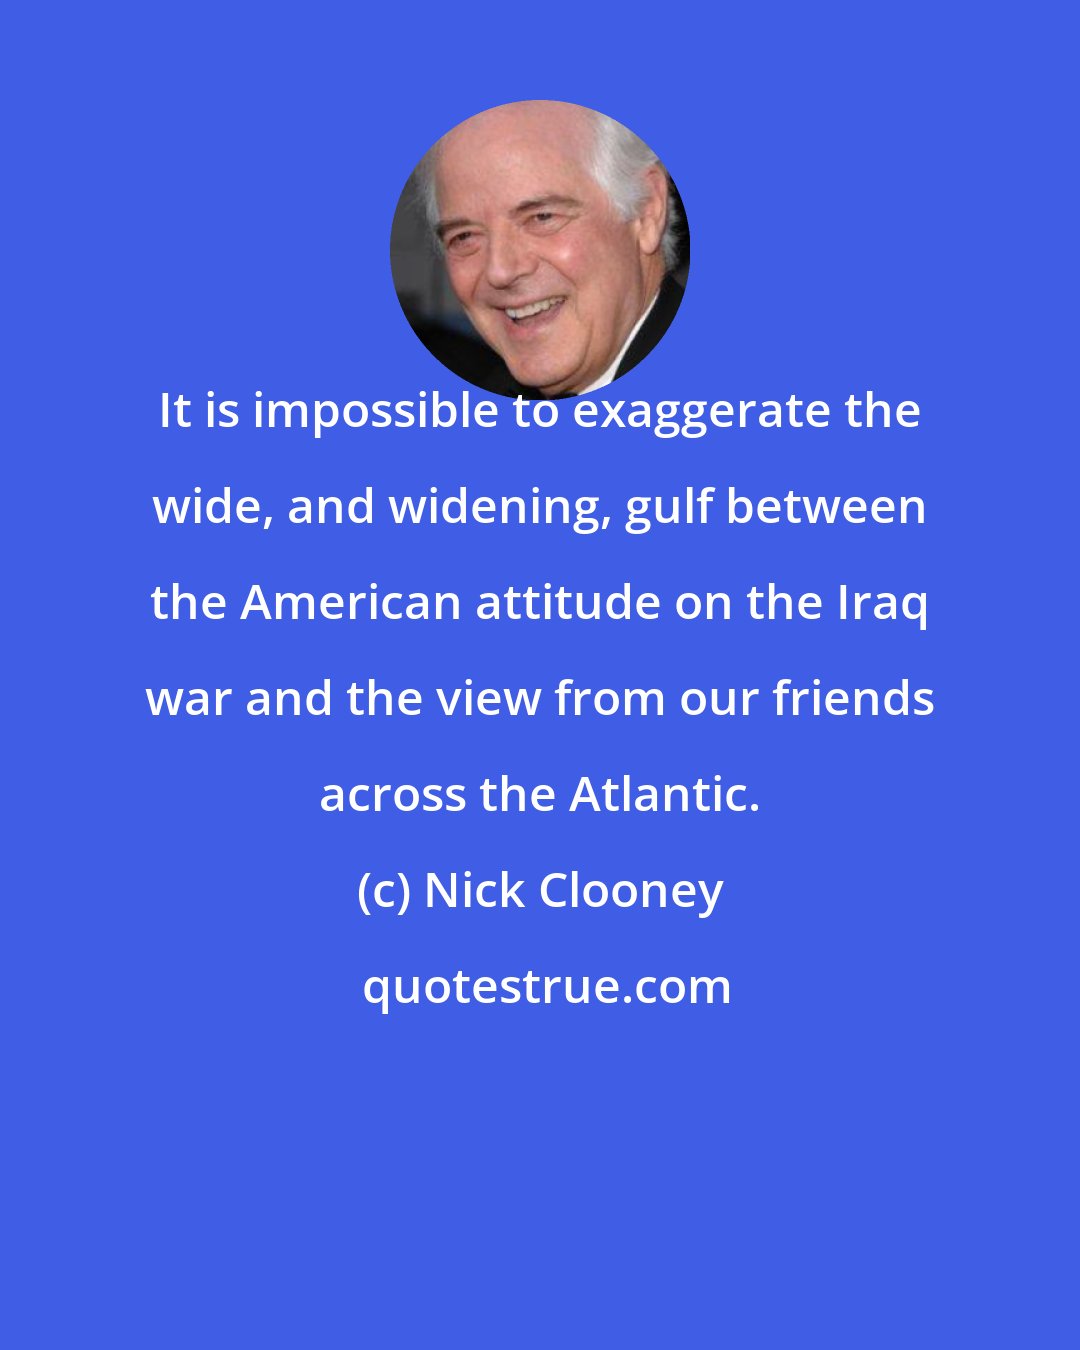 Nick Clooney: It is impossible to exaggerate the wide, and widening, gulf between the American attitude on the Iraq war and the view from our friends across the Atlantic.